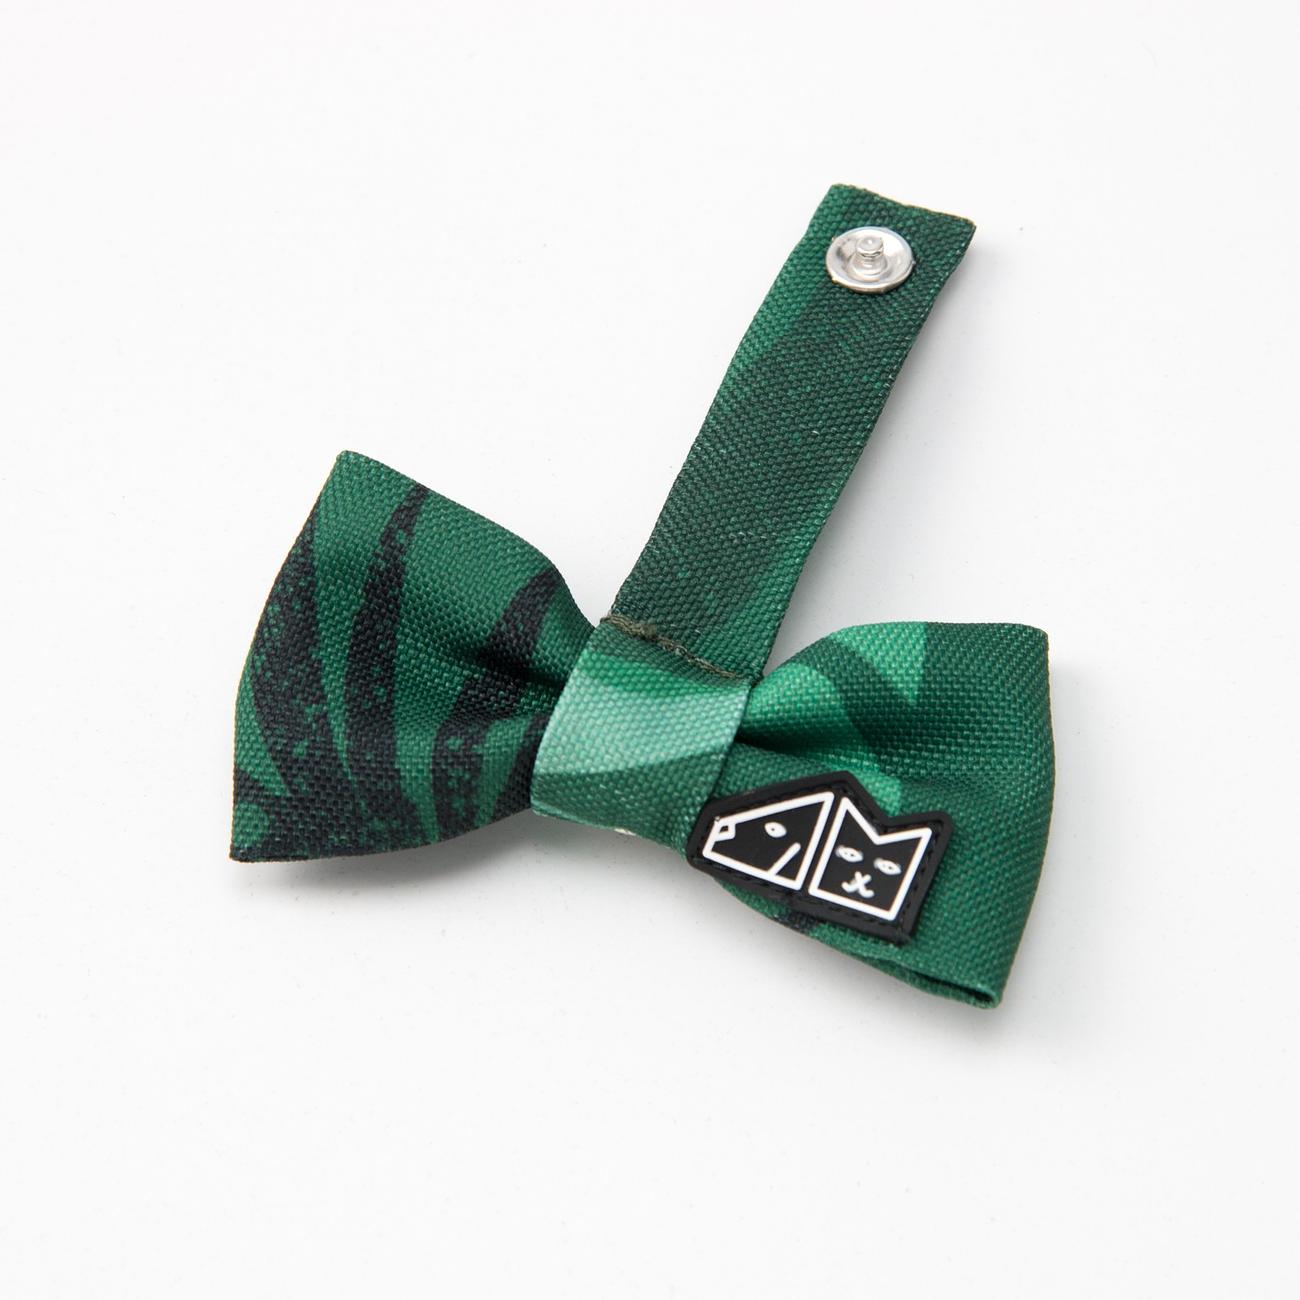 Bow tie "Welcome to the jungle" 